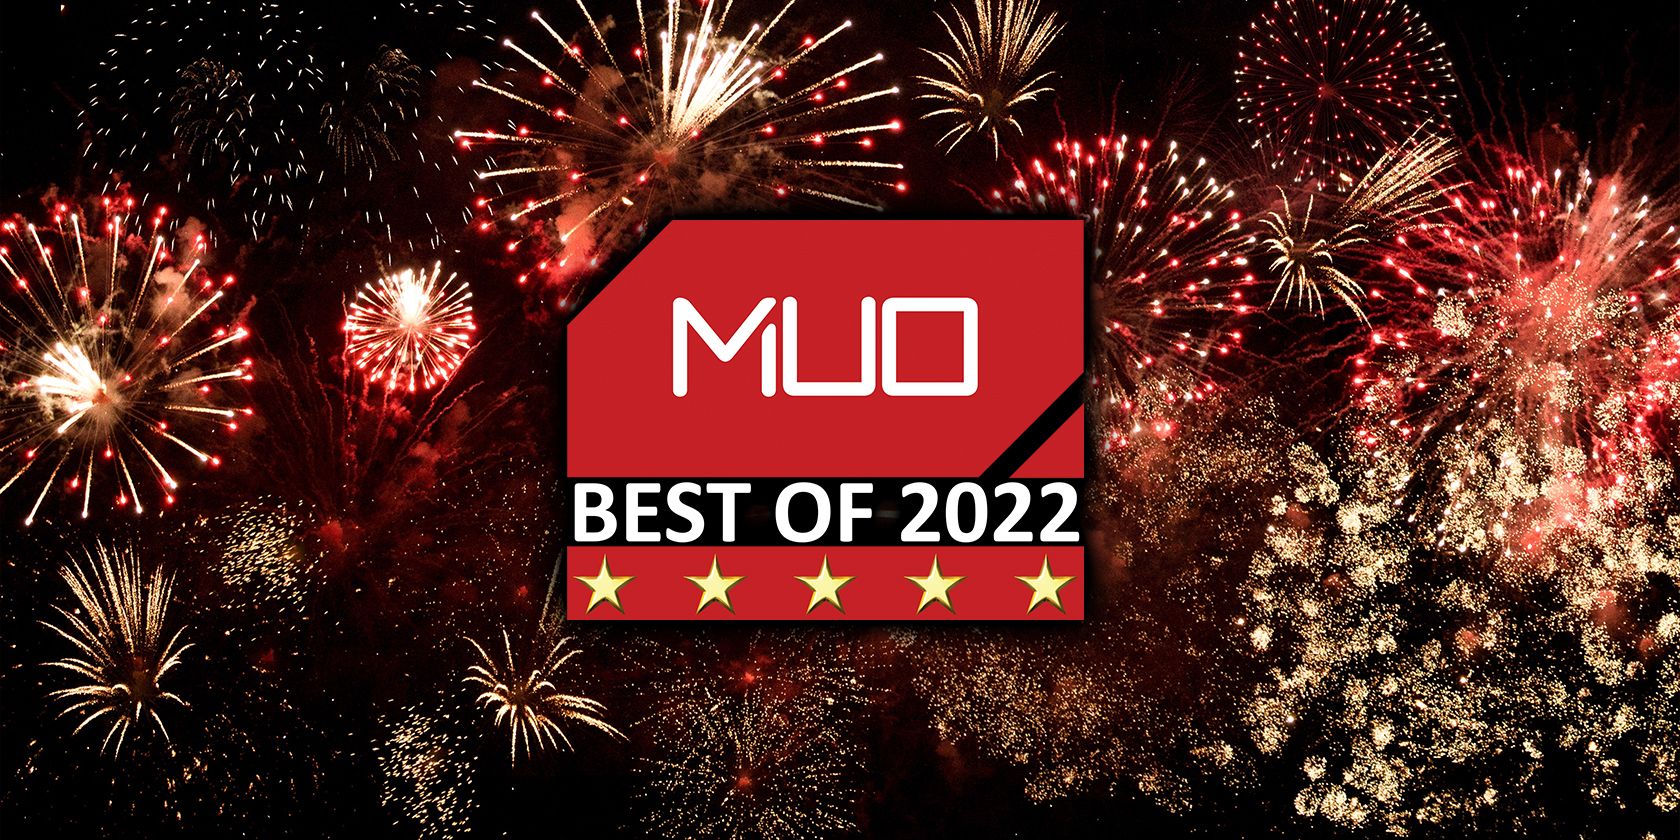 muo best tech of 2022 awards logo with fireworks in background